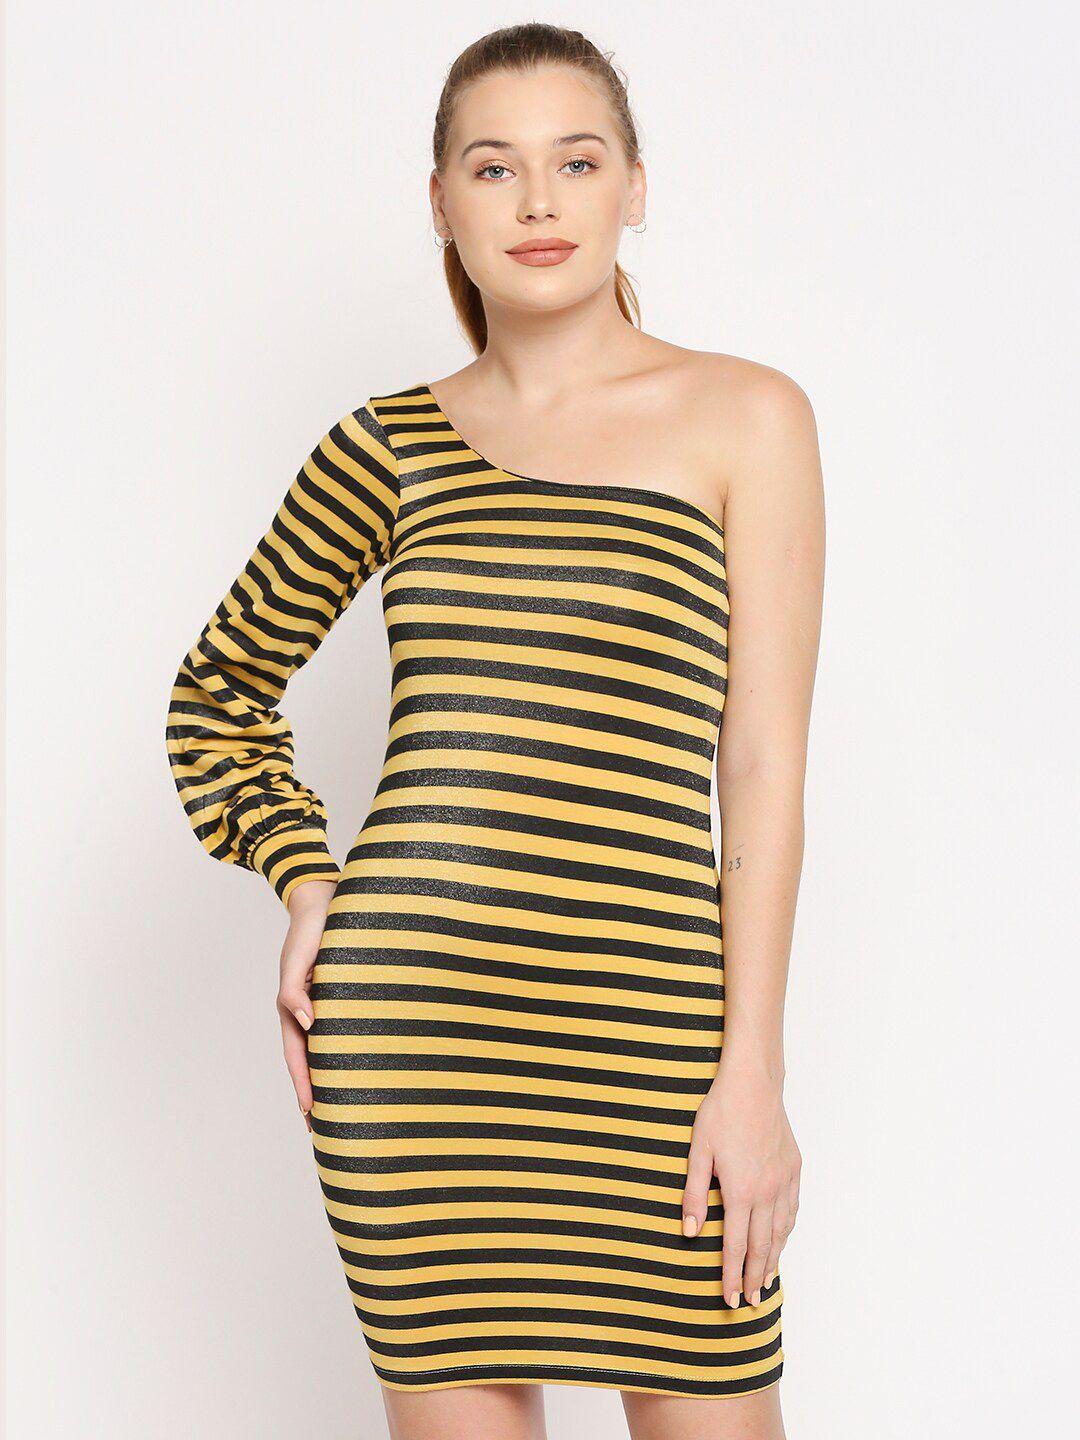 disrupt-yellow-striped-one-shoulder-bodycon-dress